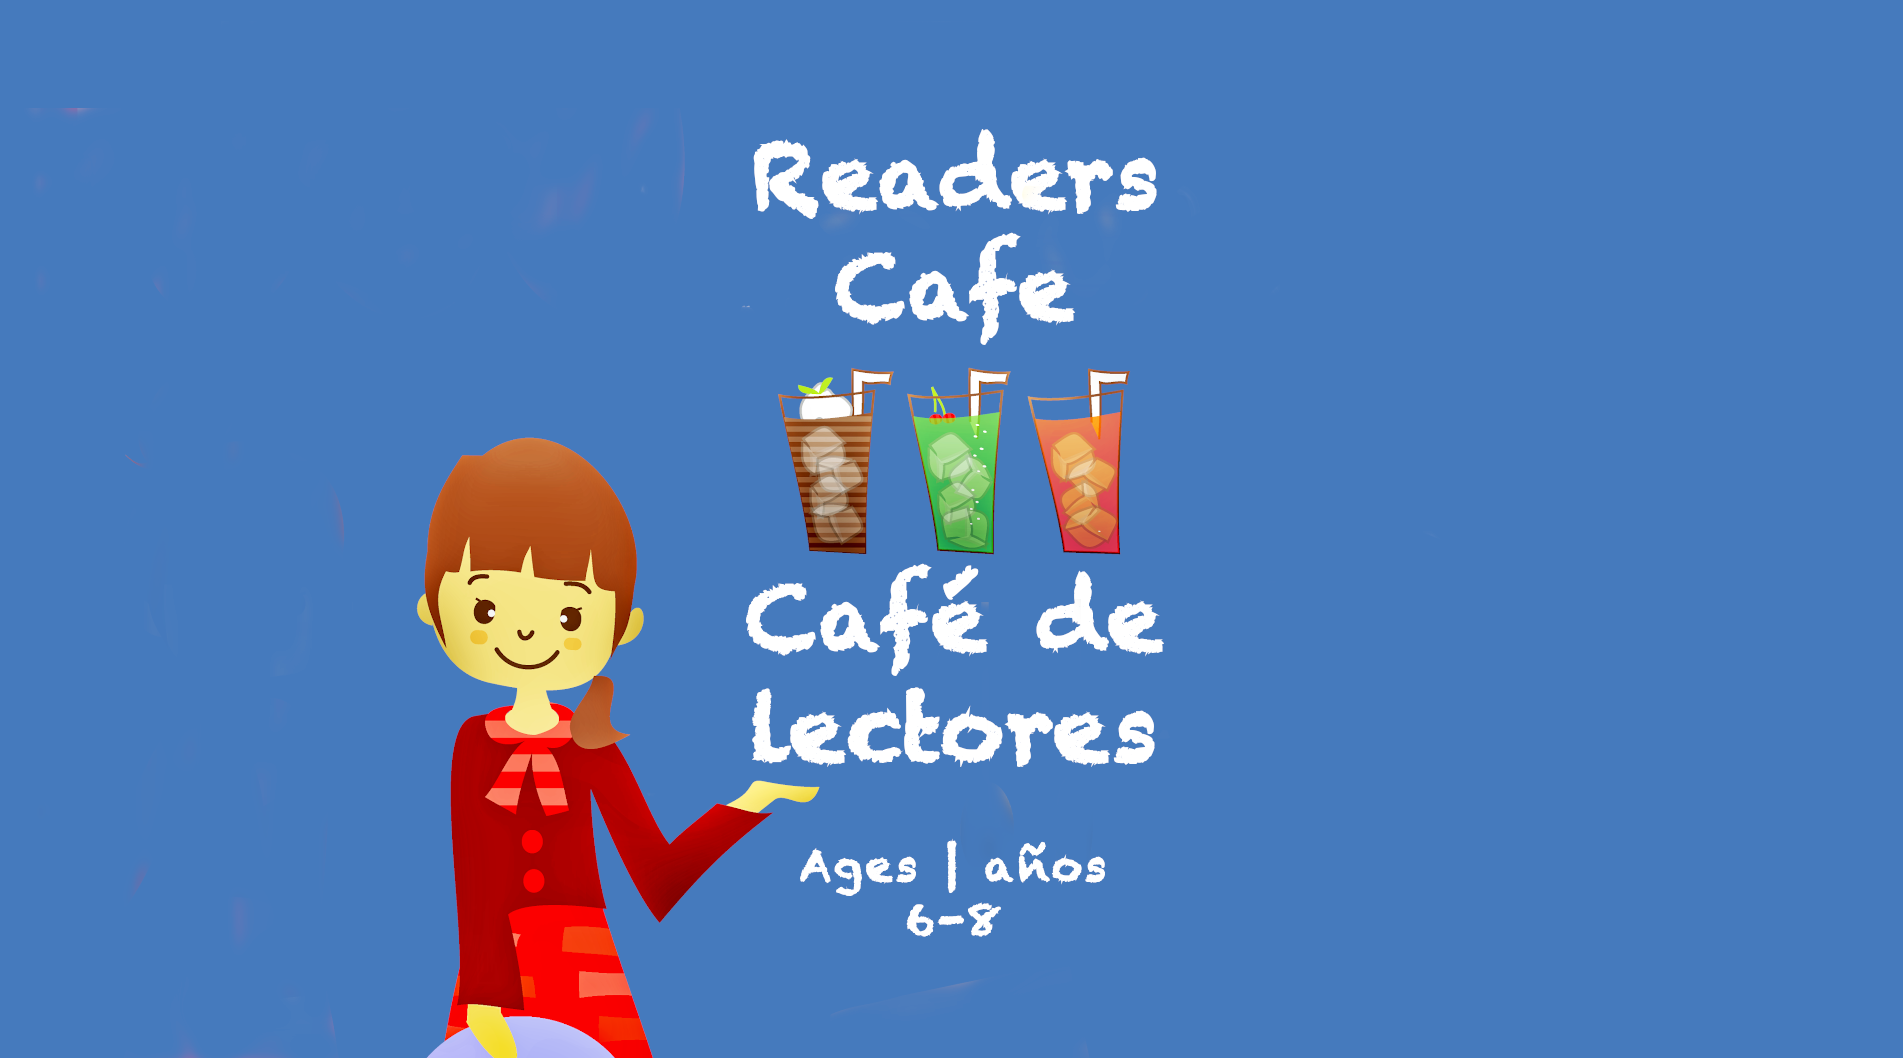 Reader’s Cafe for 6-8 year olds